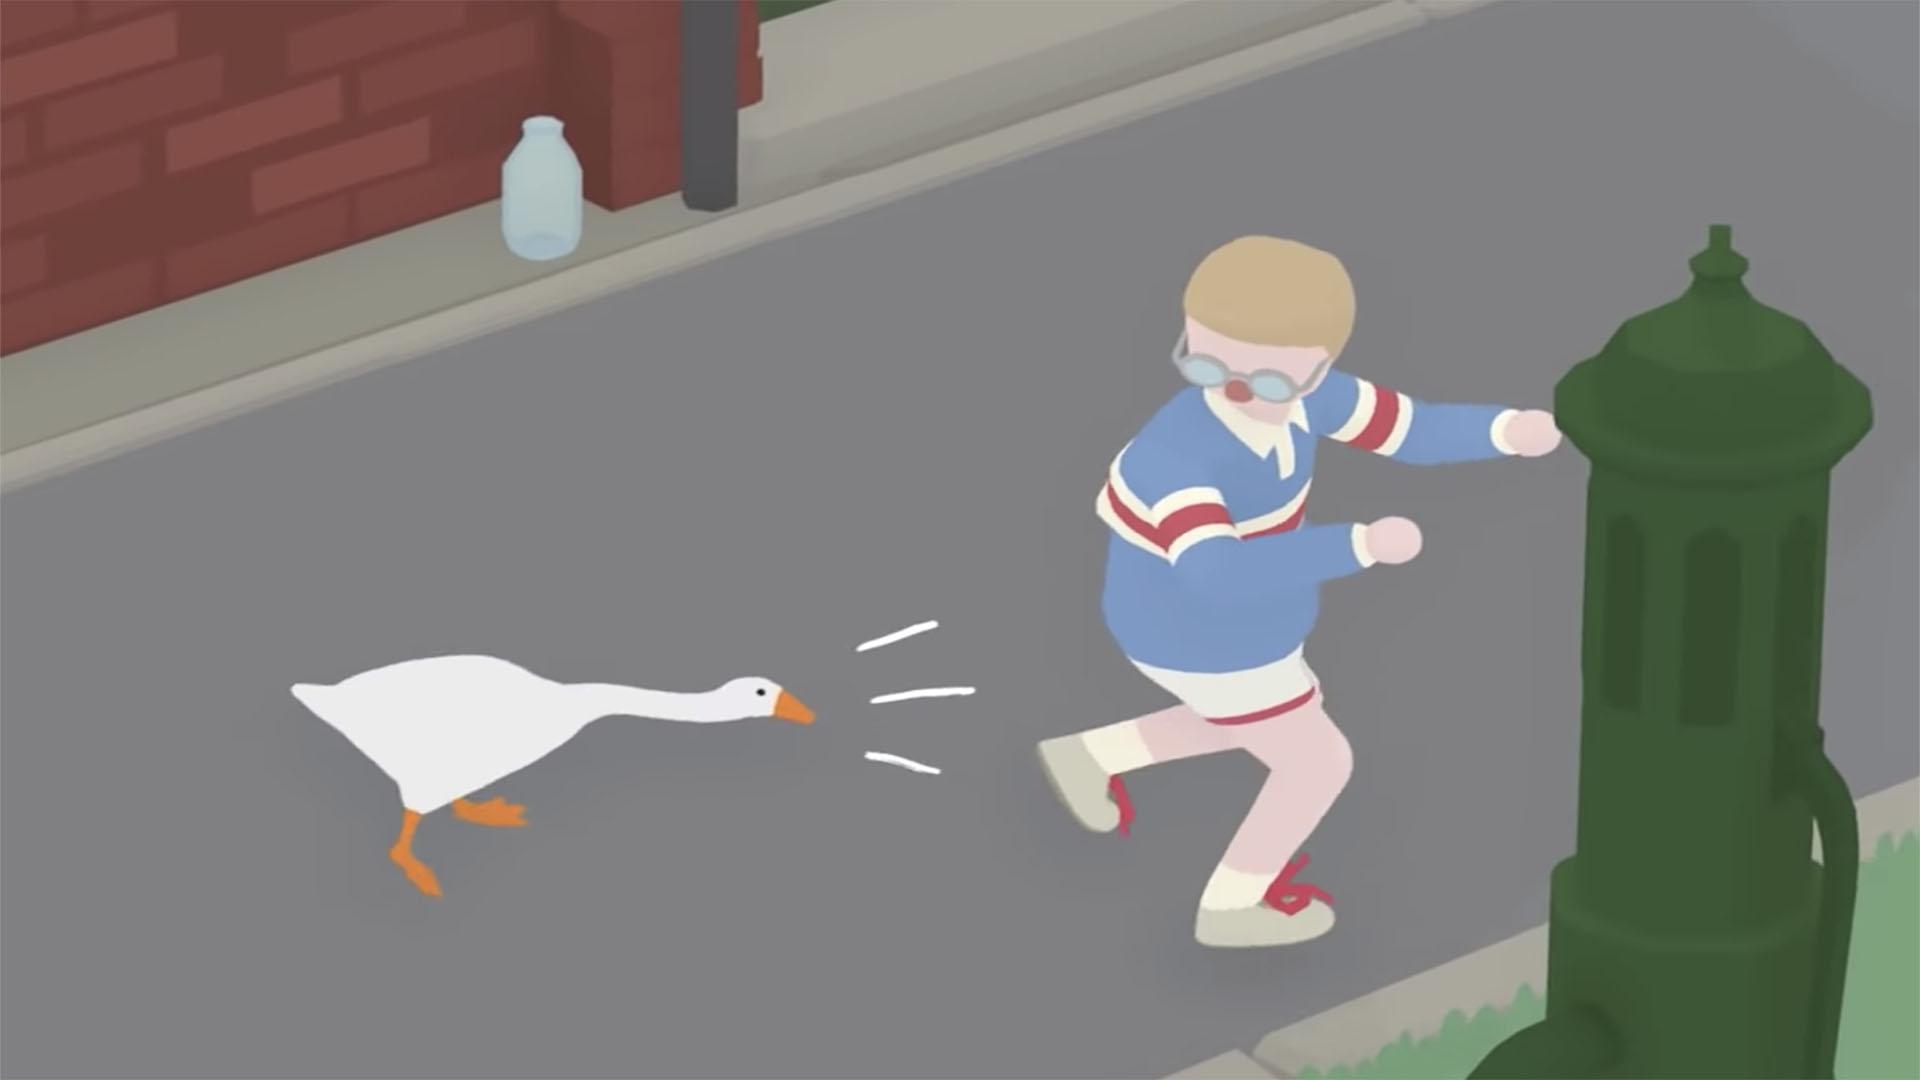 Untitled Goose Game gets the goosiest of all launch trailers